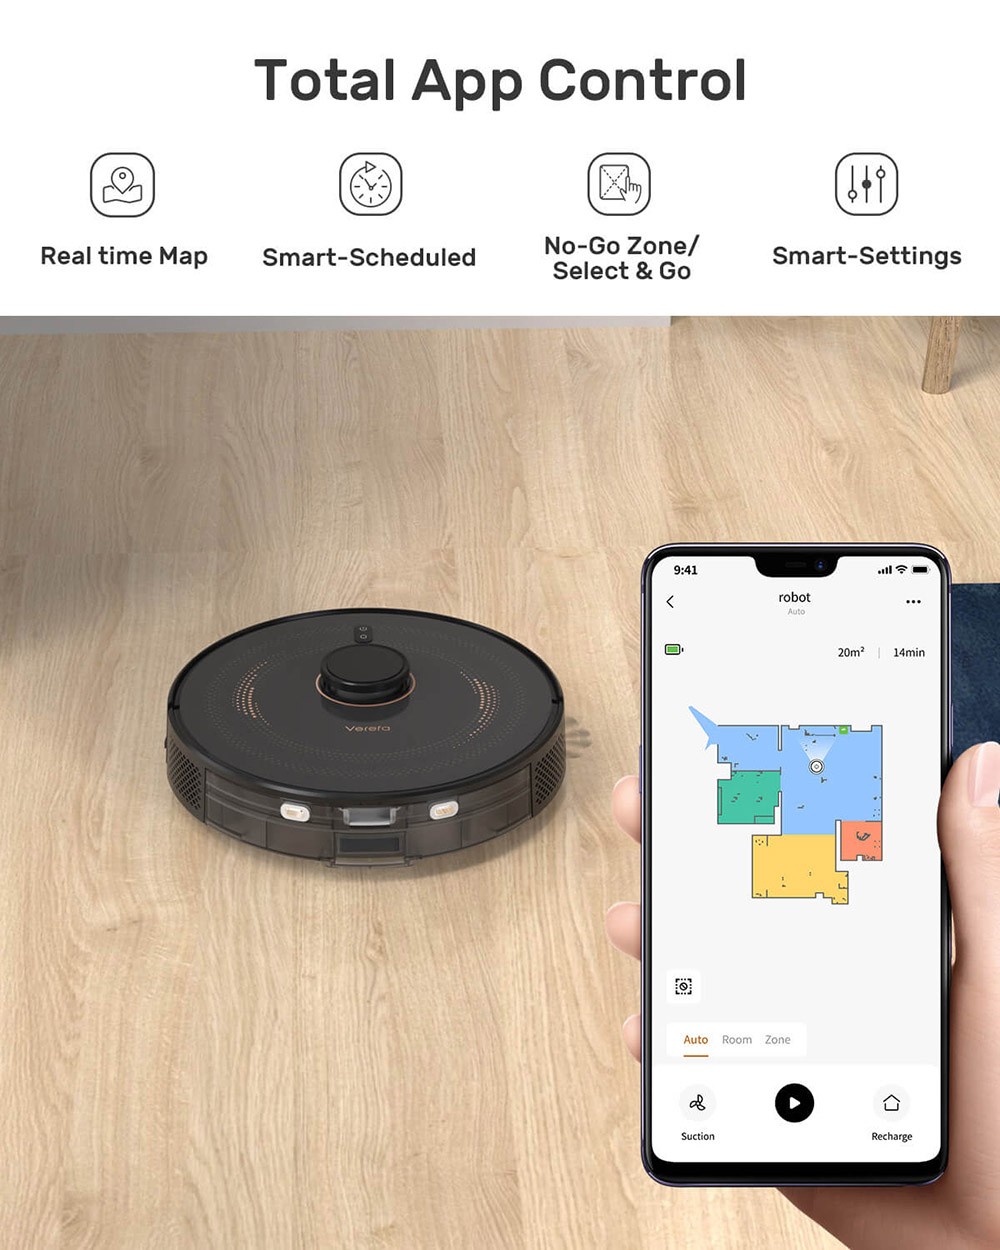 Verefa L11 Pro Robot Vacuum Cleaner, Self Emptying, 3000Pa Suction, LiDAR Navigation, 4L Dust Bag, Max 270 Mins Runtime, 70 Days Hands-Free Cleaning, App / Voice Control